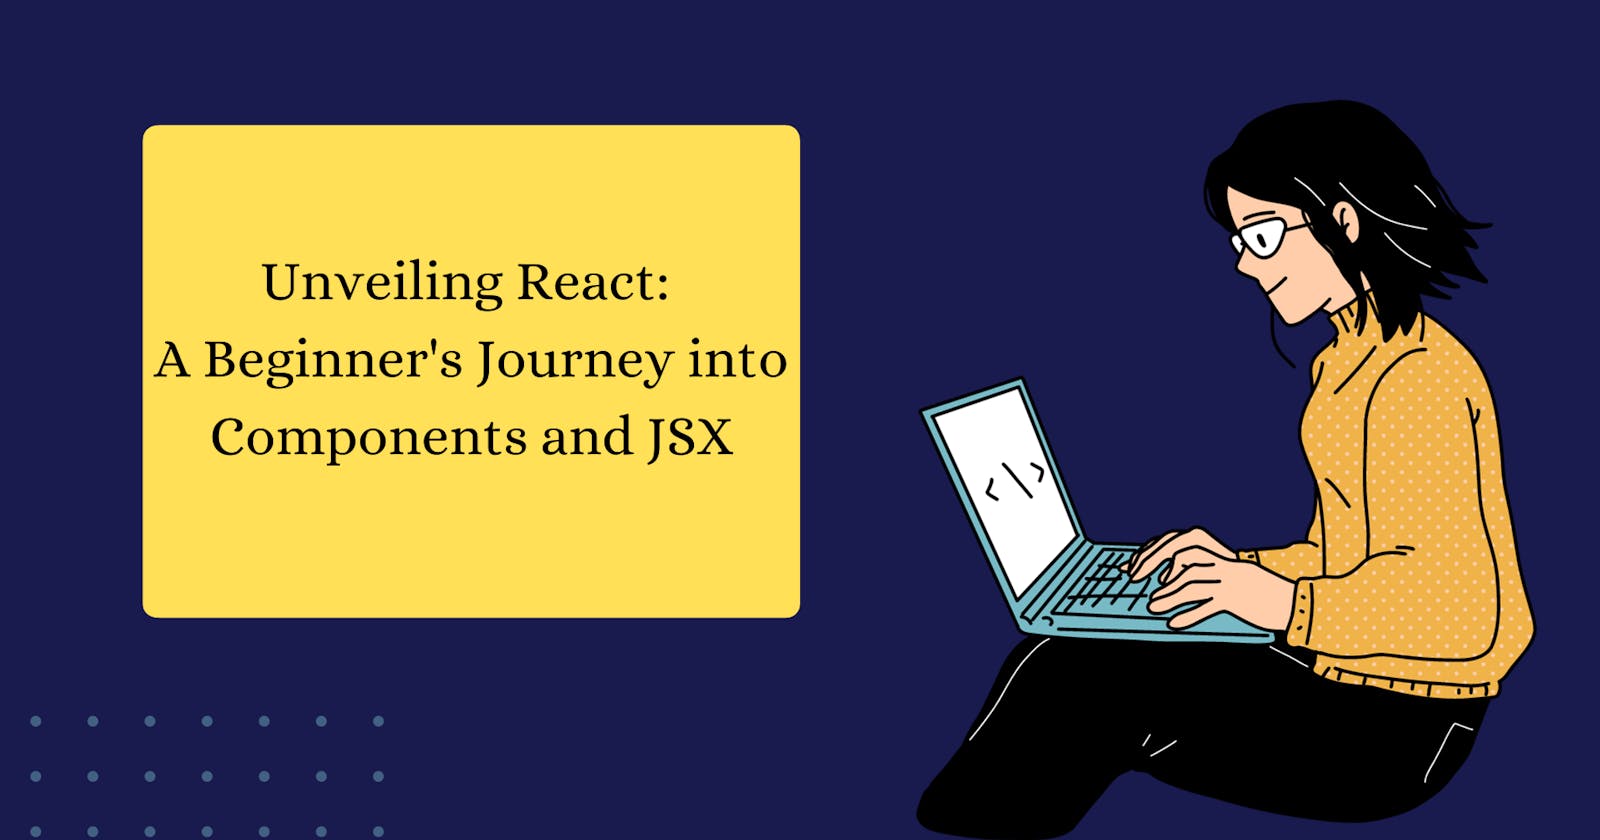 Unveiling React: A Beginner's Journey into Components and JSX